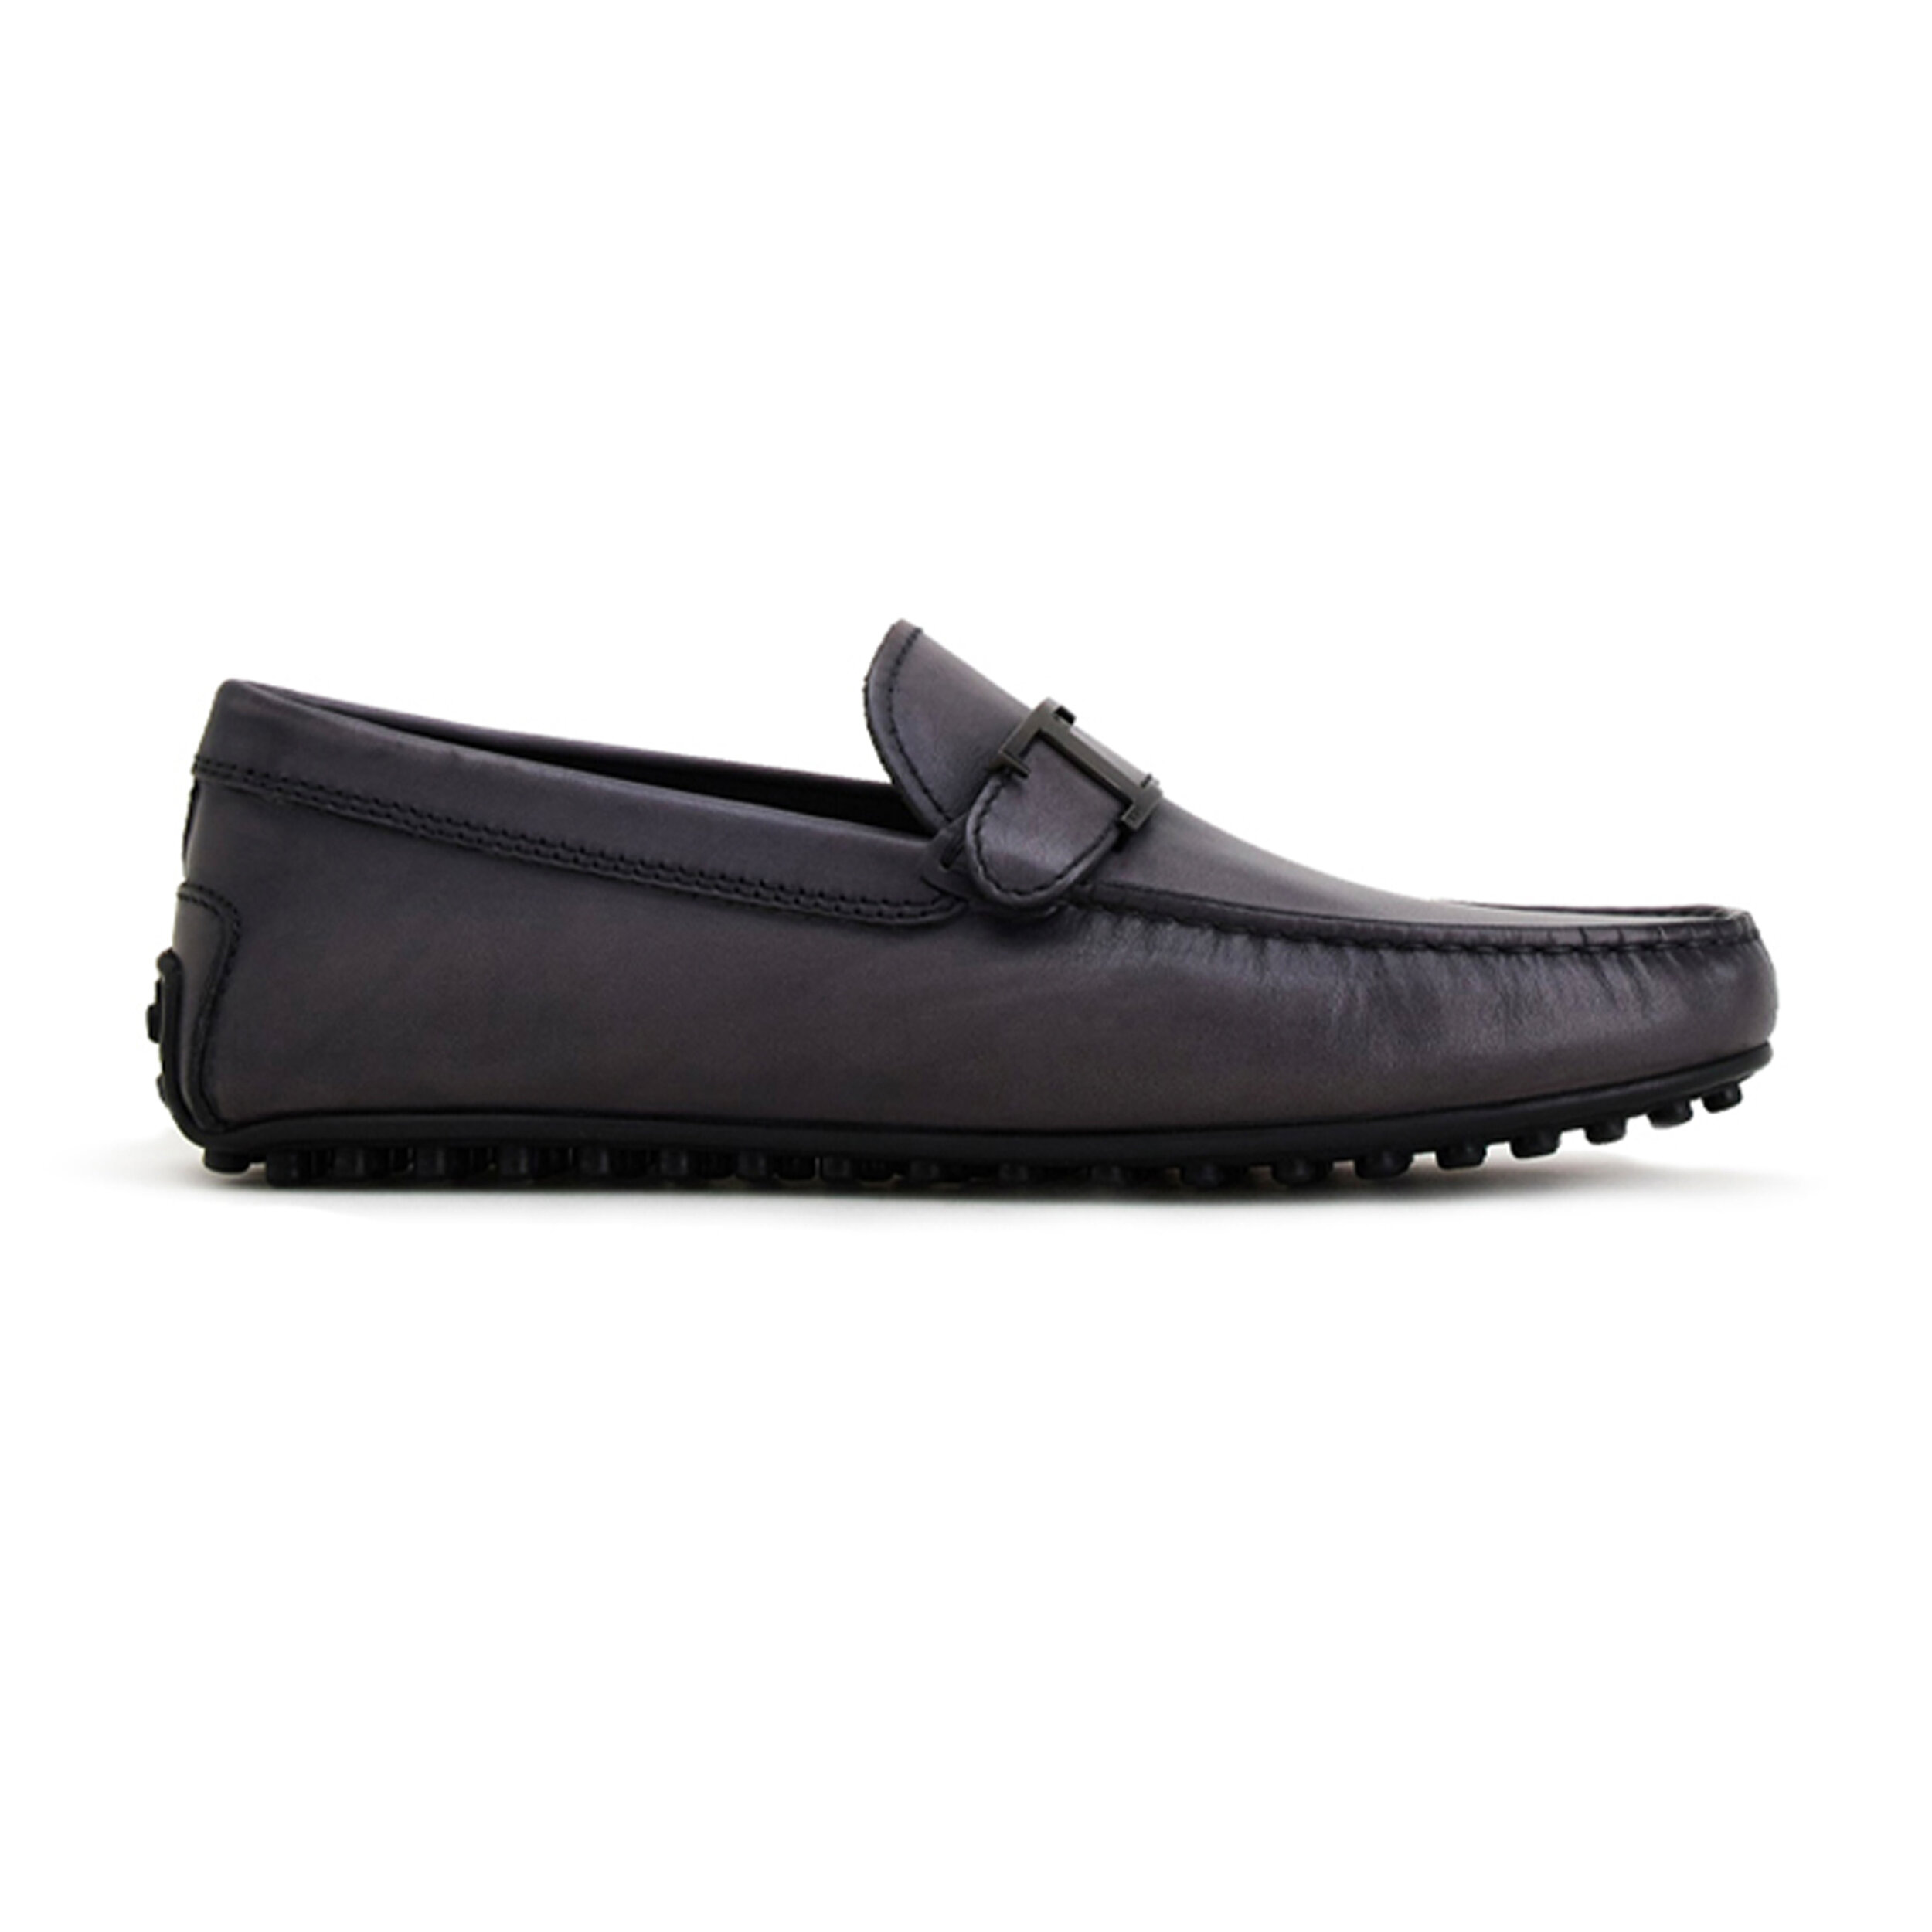  City Gommino in Leather, Tod's P39,950 